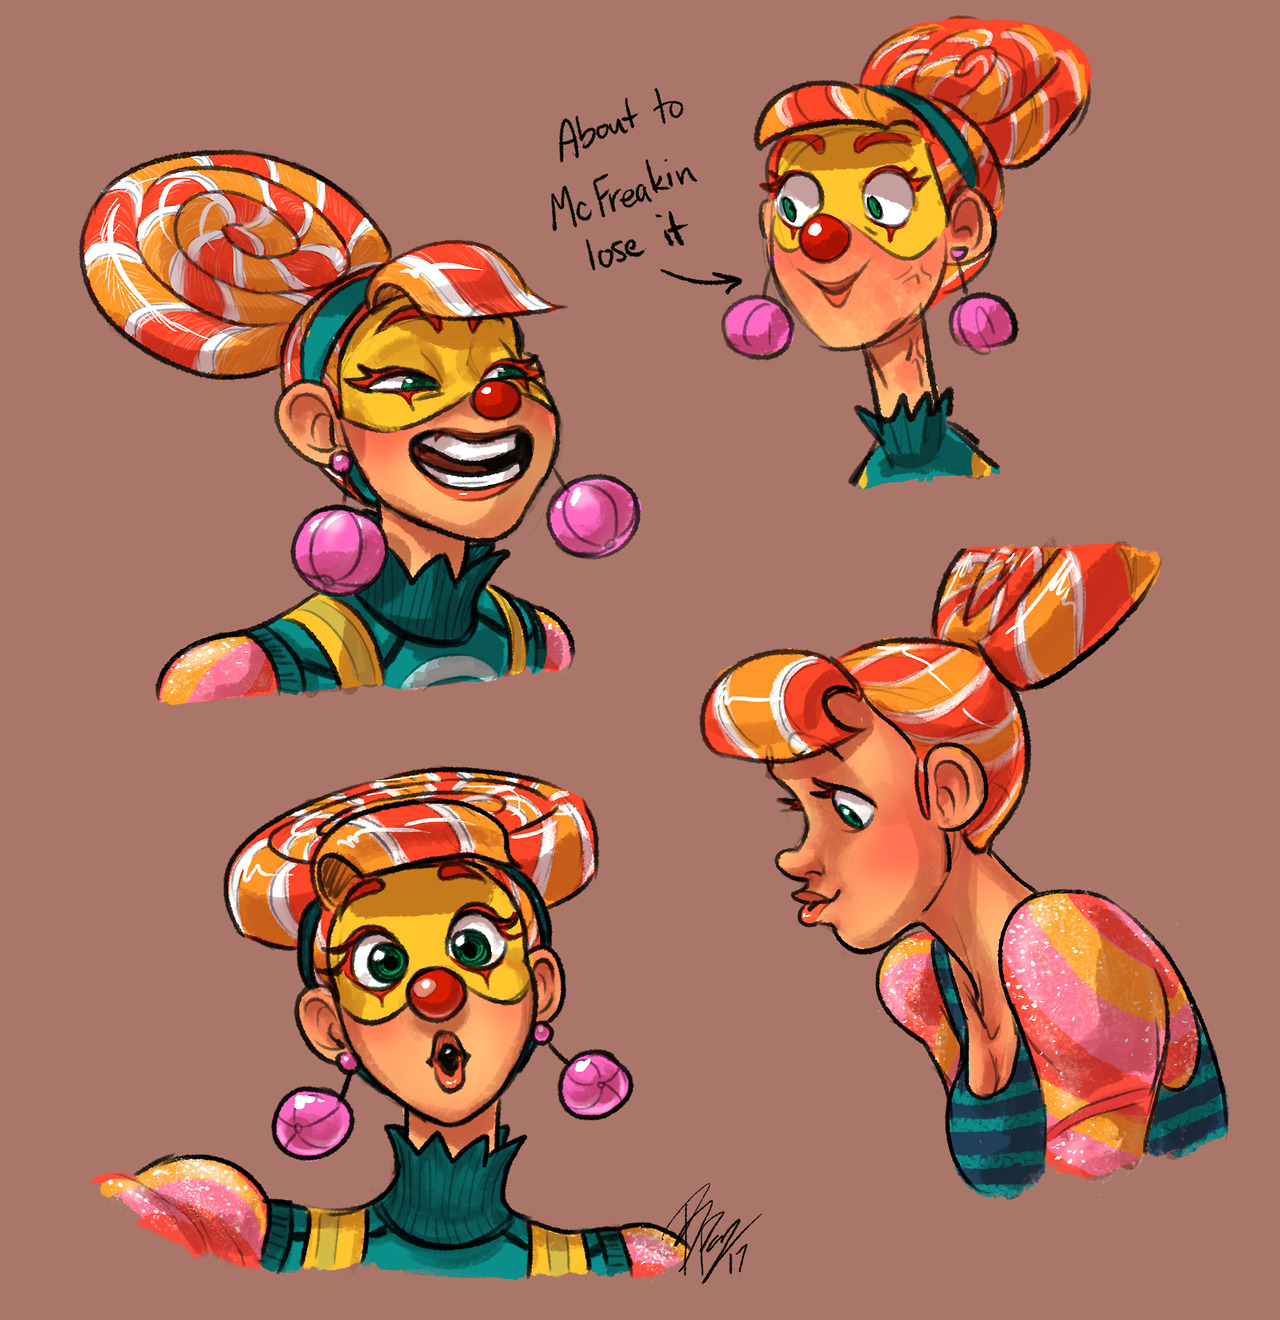 bonkalore: Oh yeah, I colored in one of the picture sets from my other Lola post!